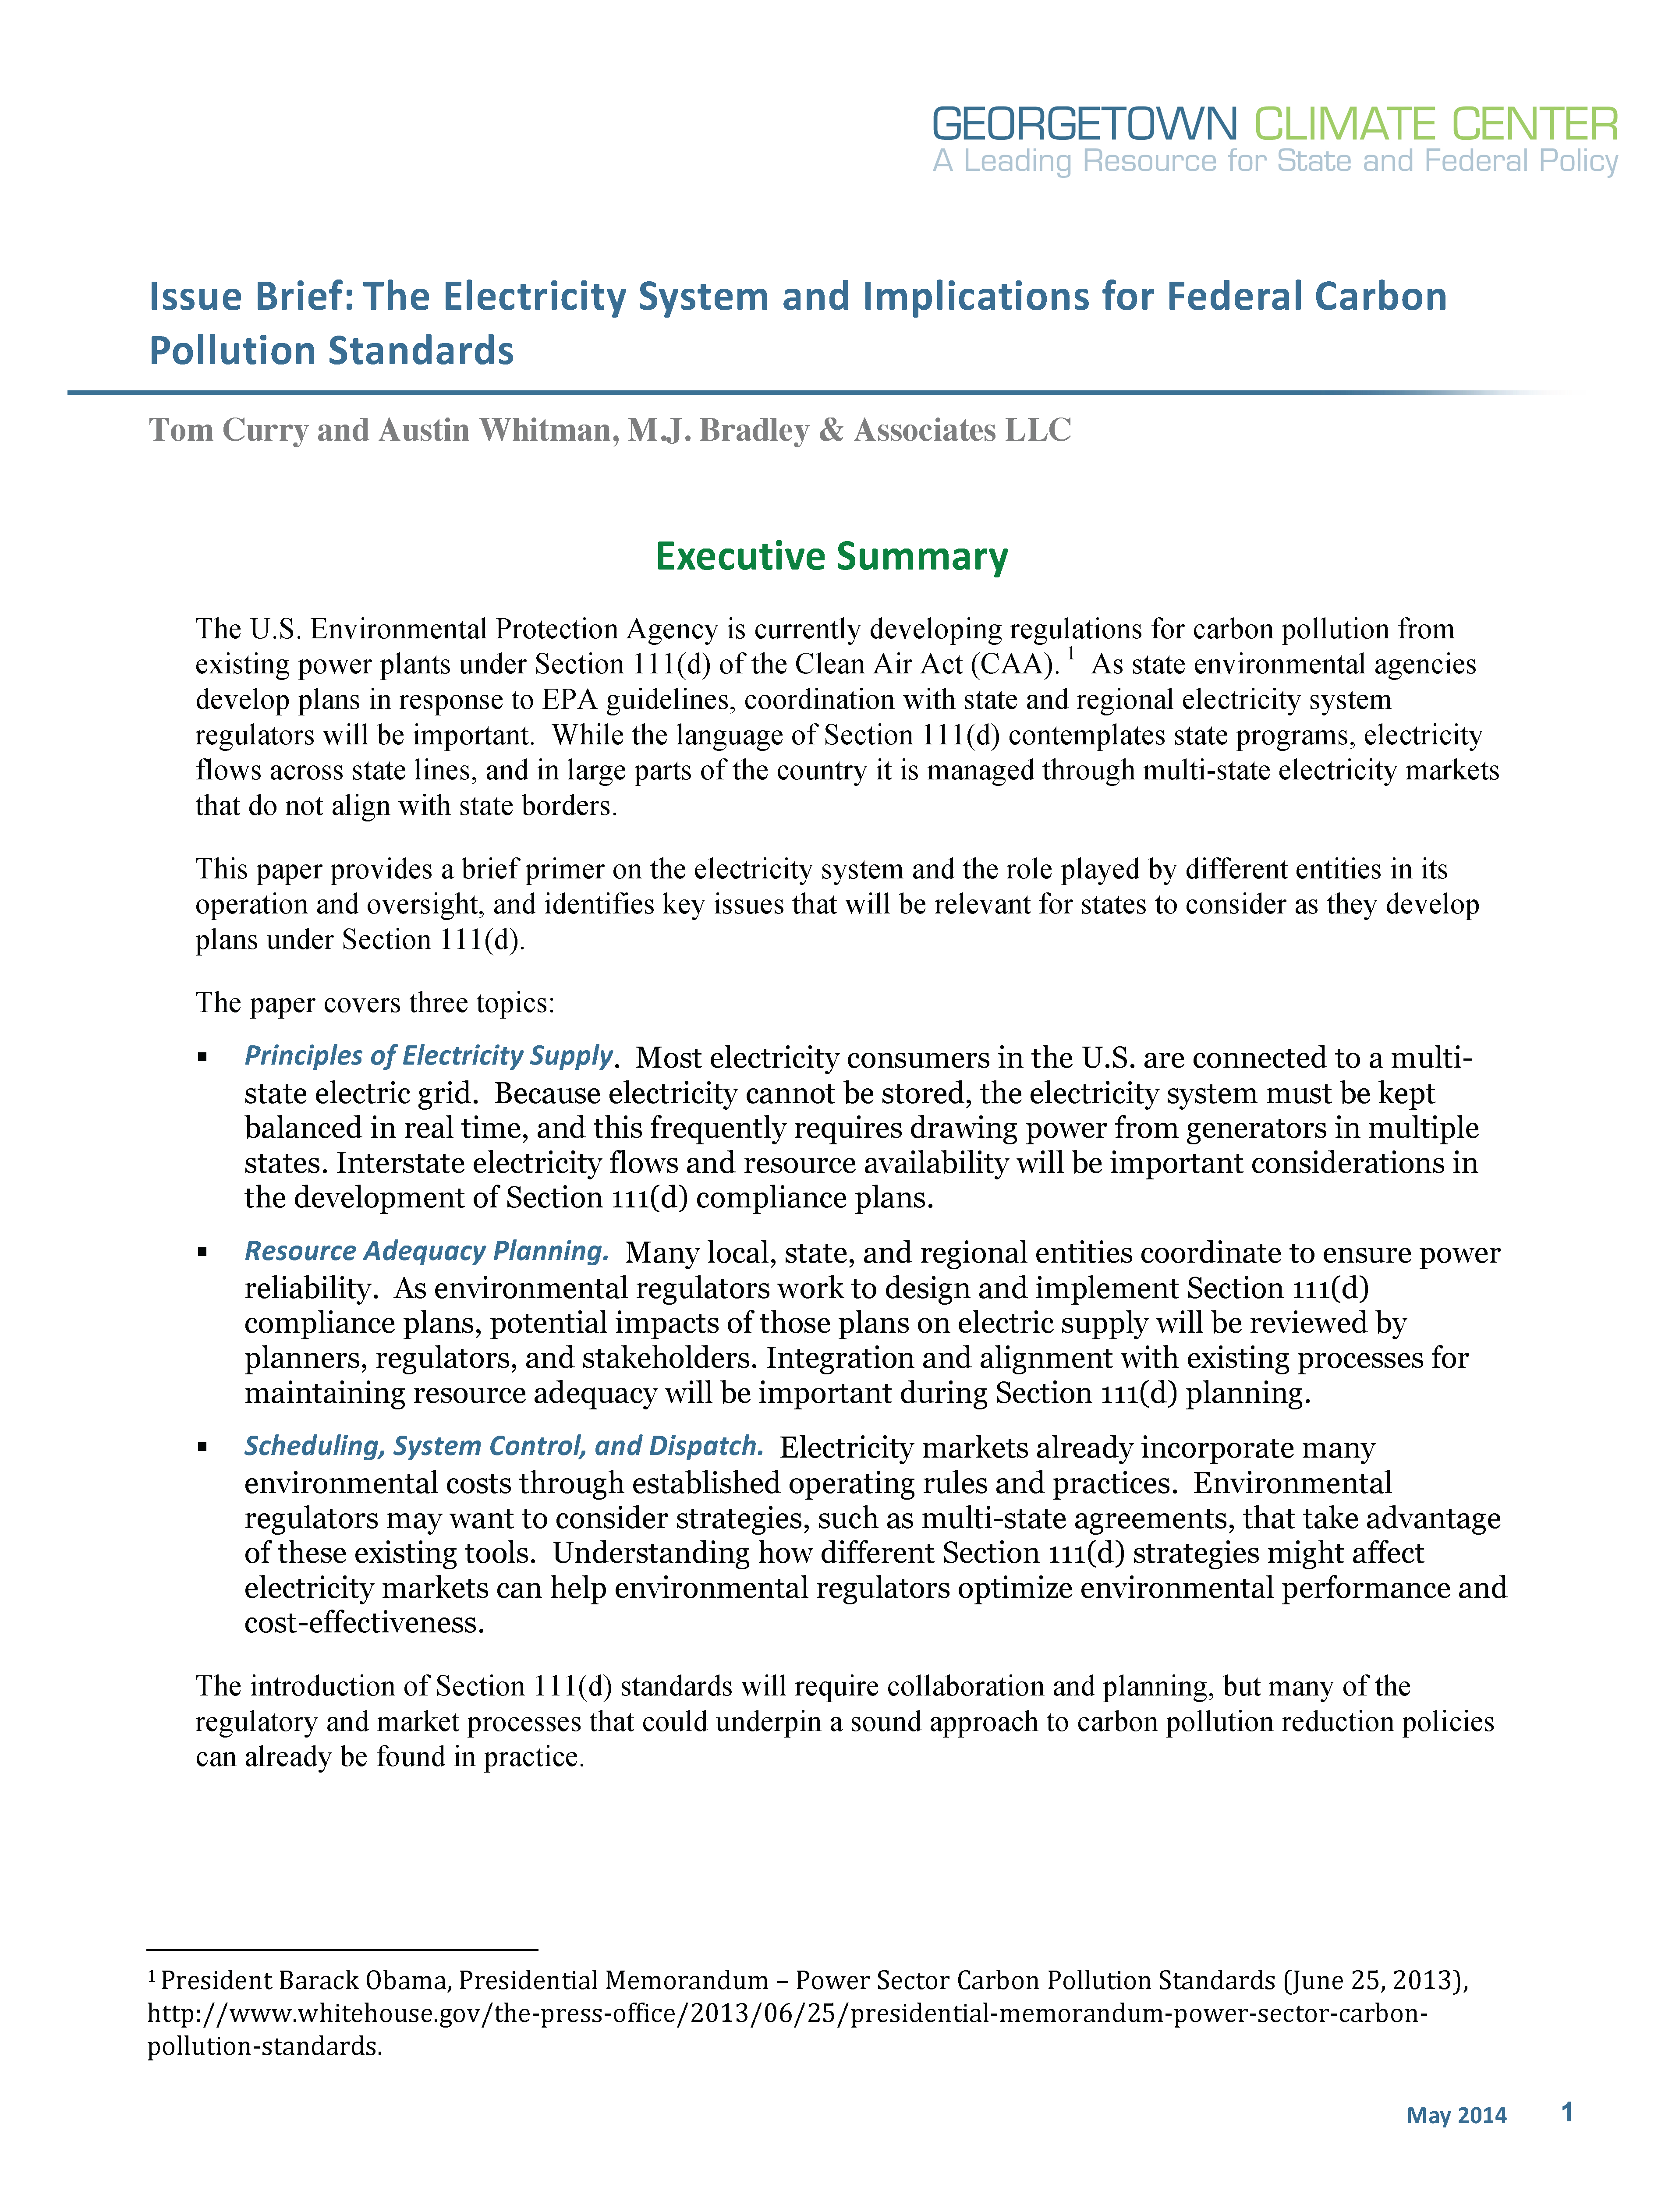 Primer on Structure of the Electric Power System and Implications for Federal Carbon Pollution Standards for Existing Power Plants